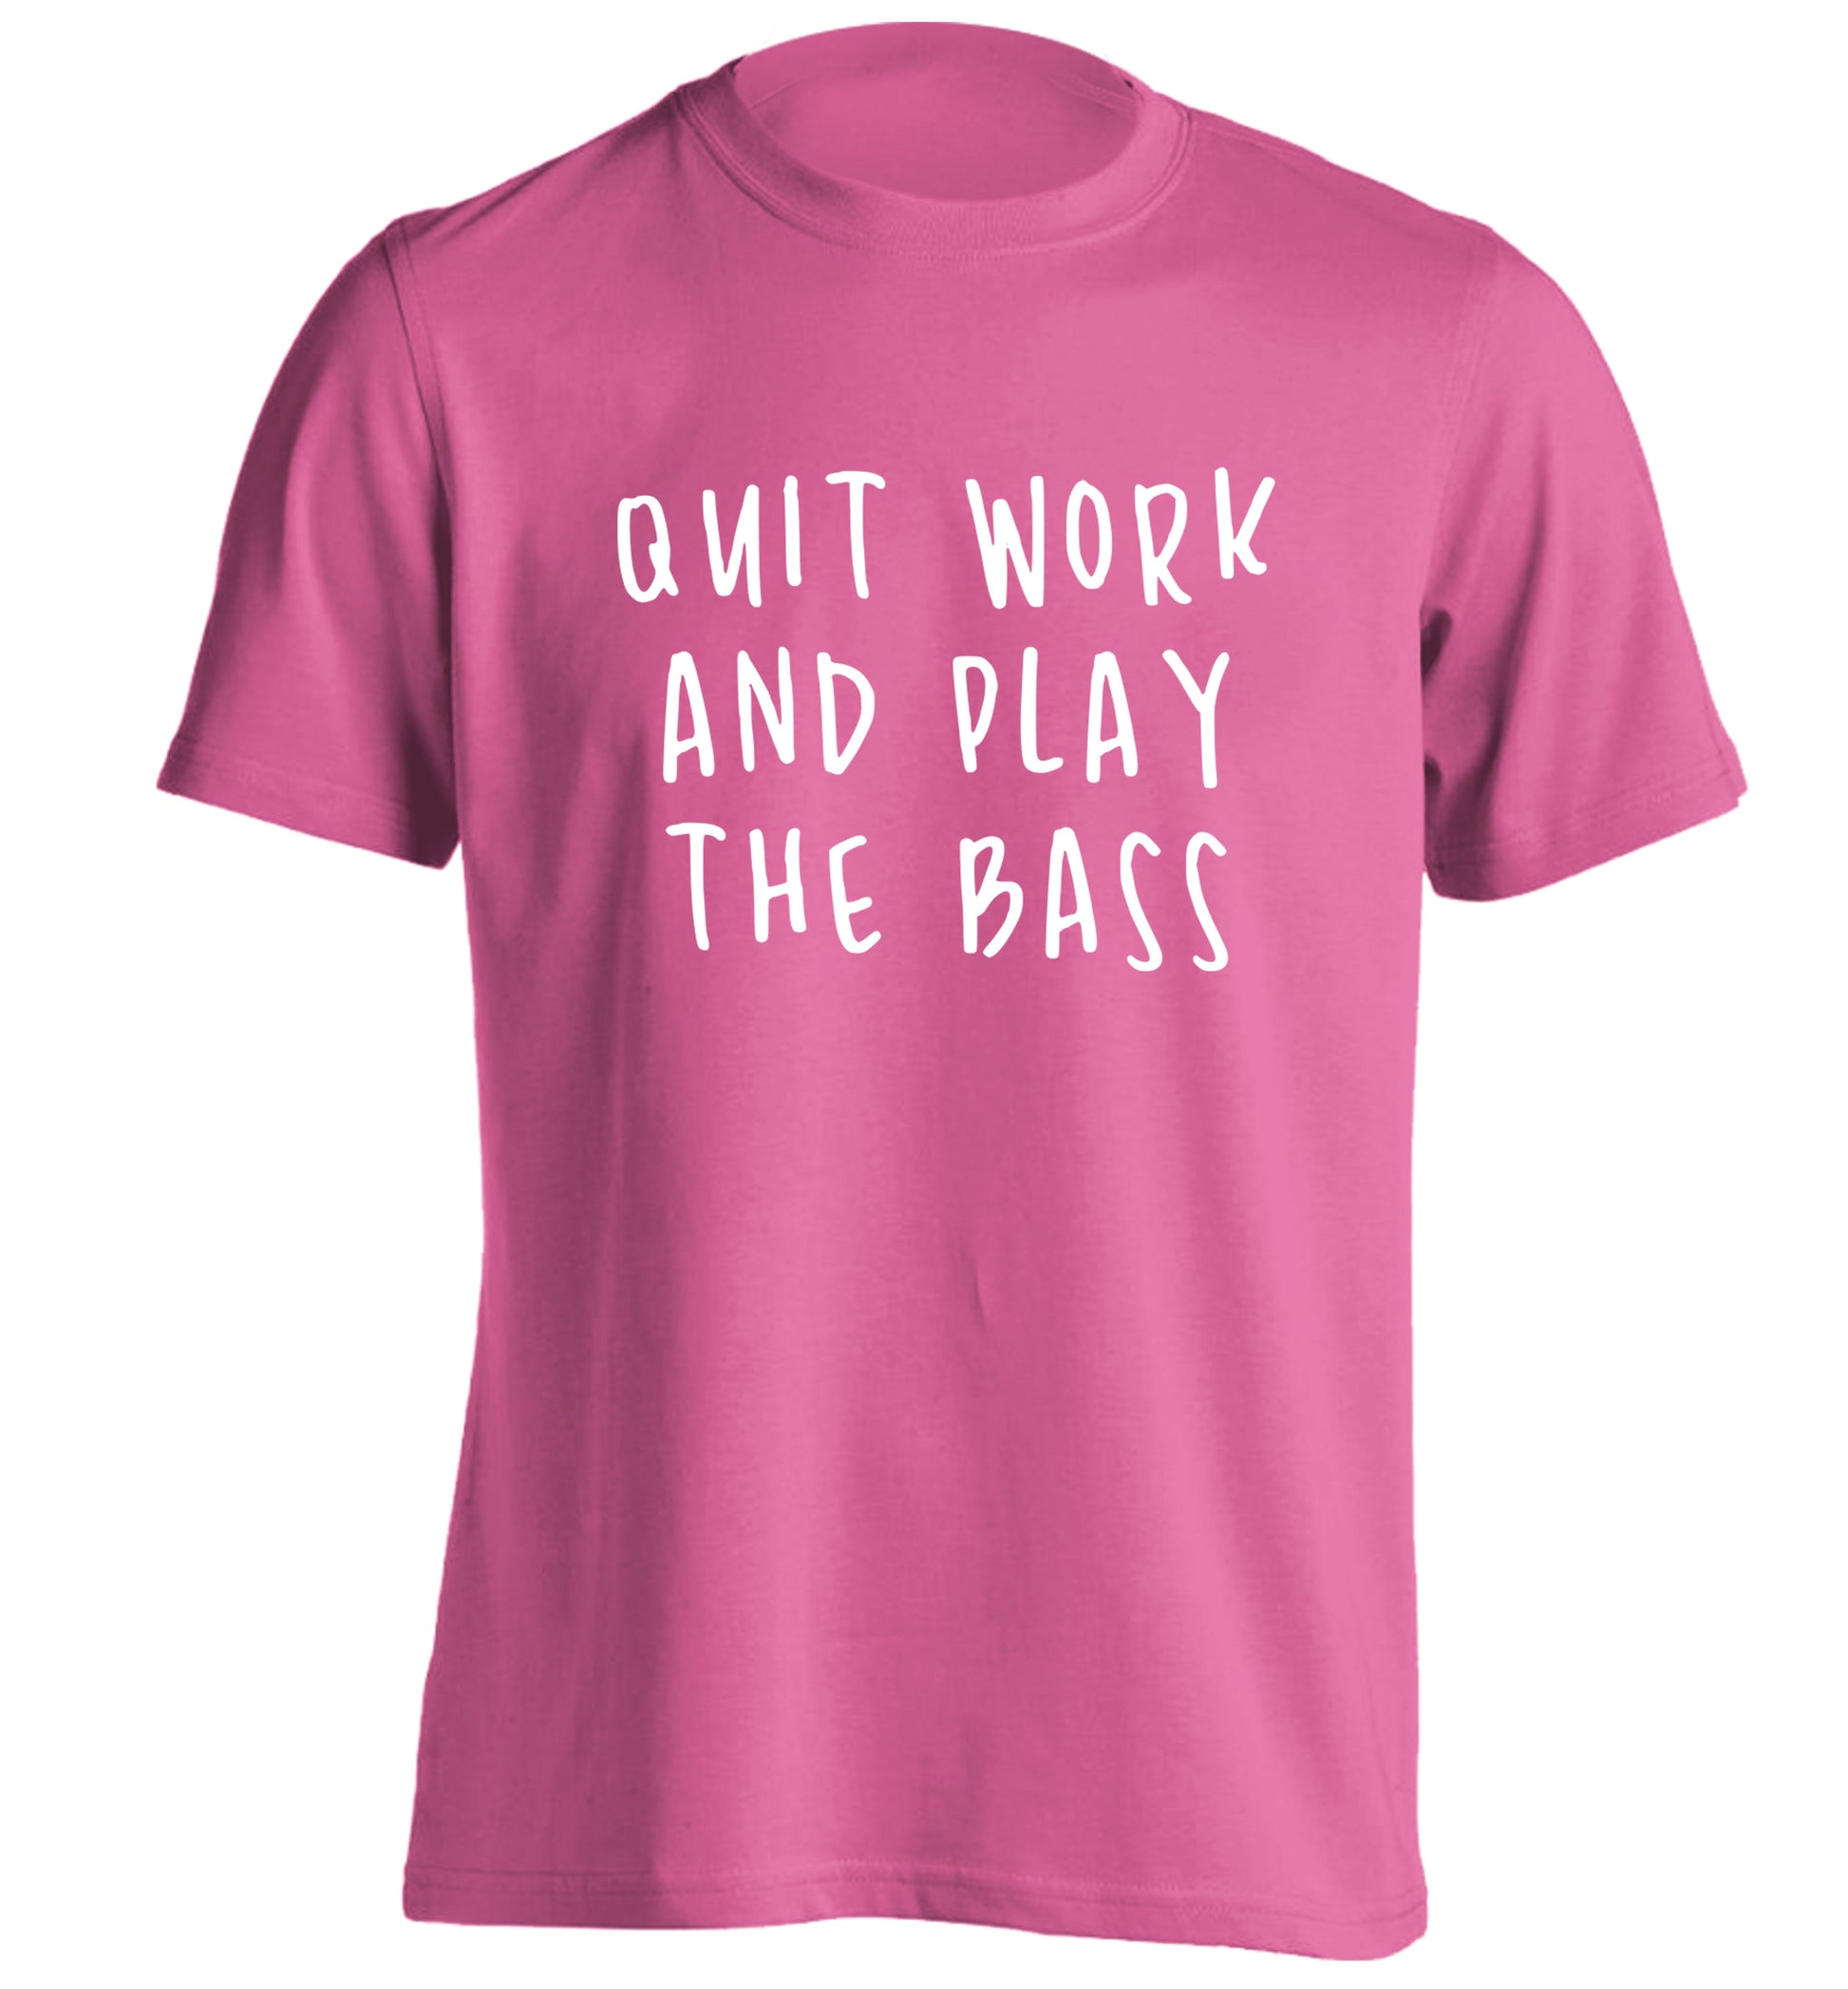 Quit work and play the bass adults unisex pink Tshirt 2XL